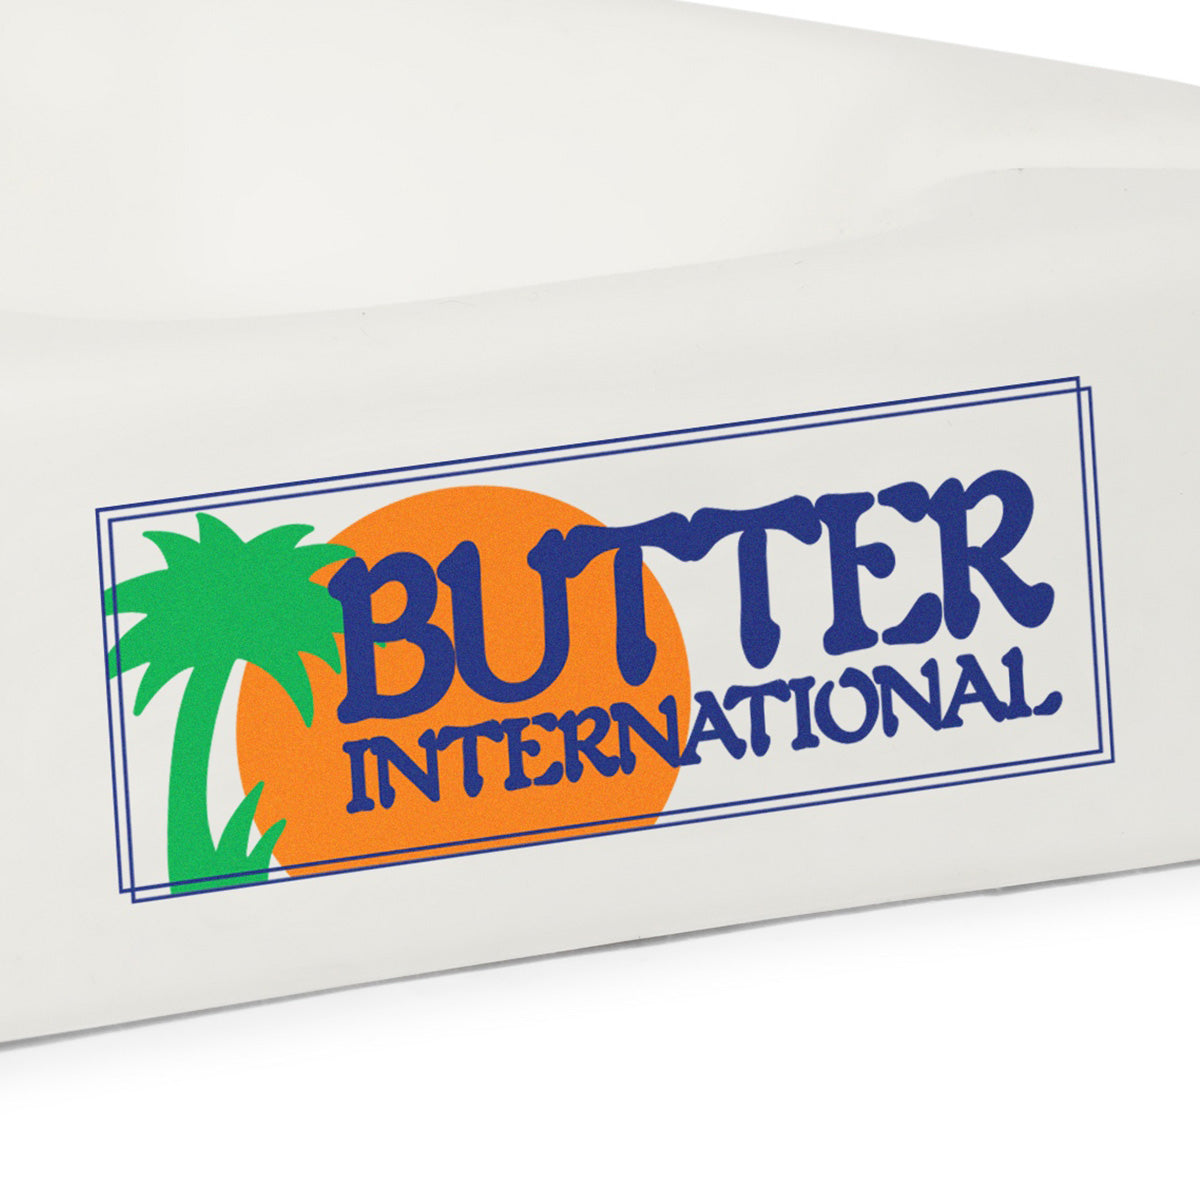 Butter Goods Vacation Ash Tray White